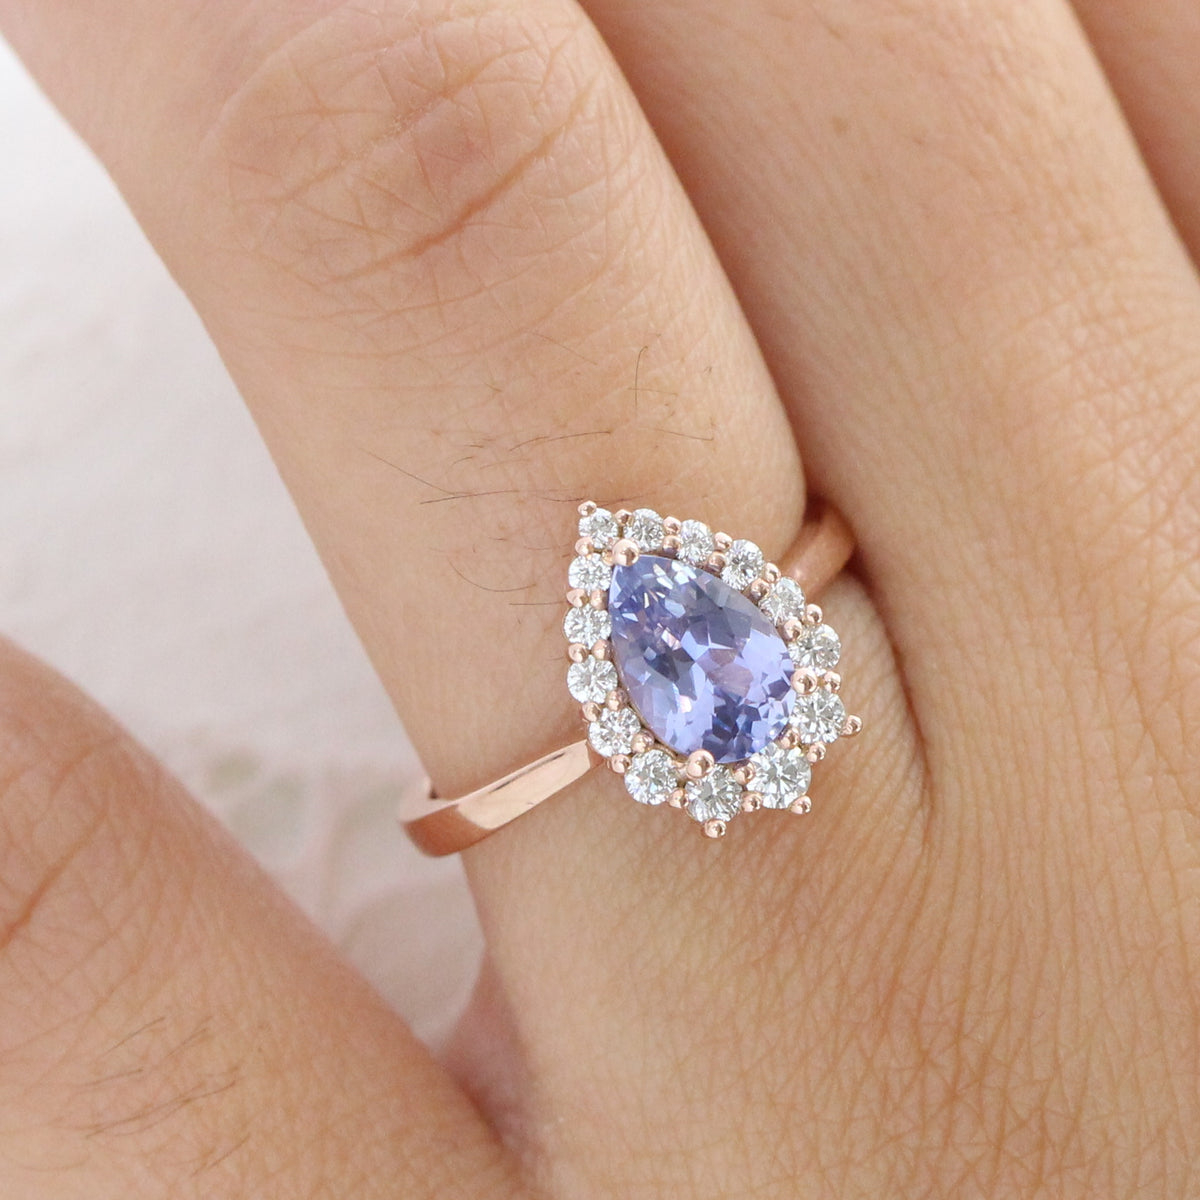 Halo diamond lavender sapphire ring rose gold pear engagement ring la more design jewelry